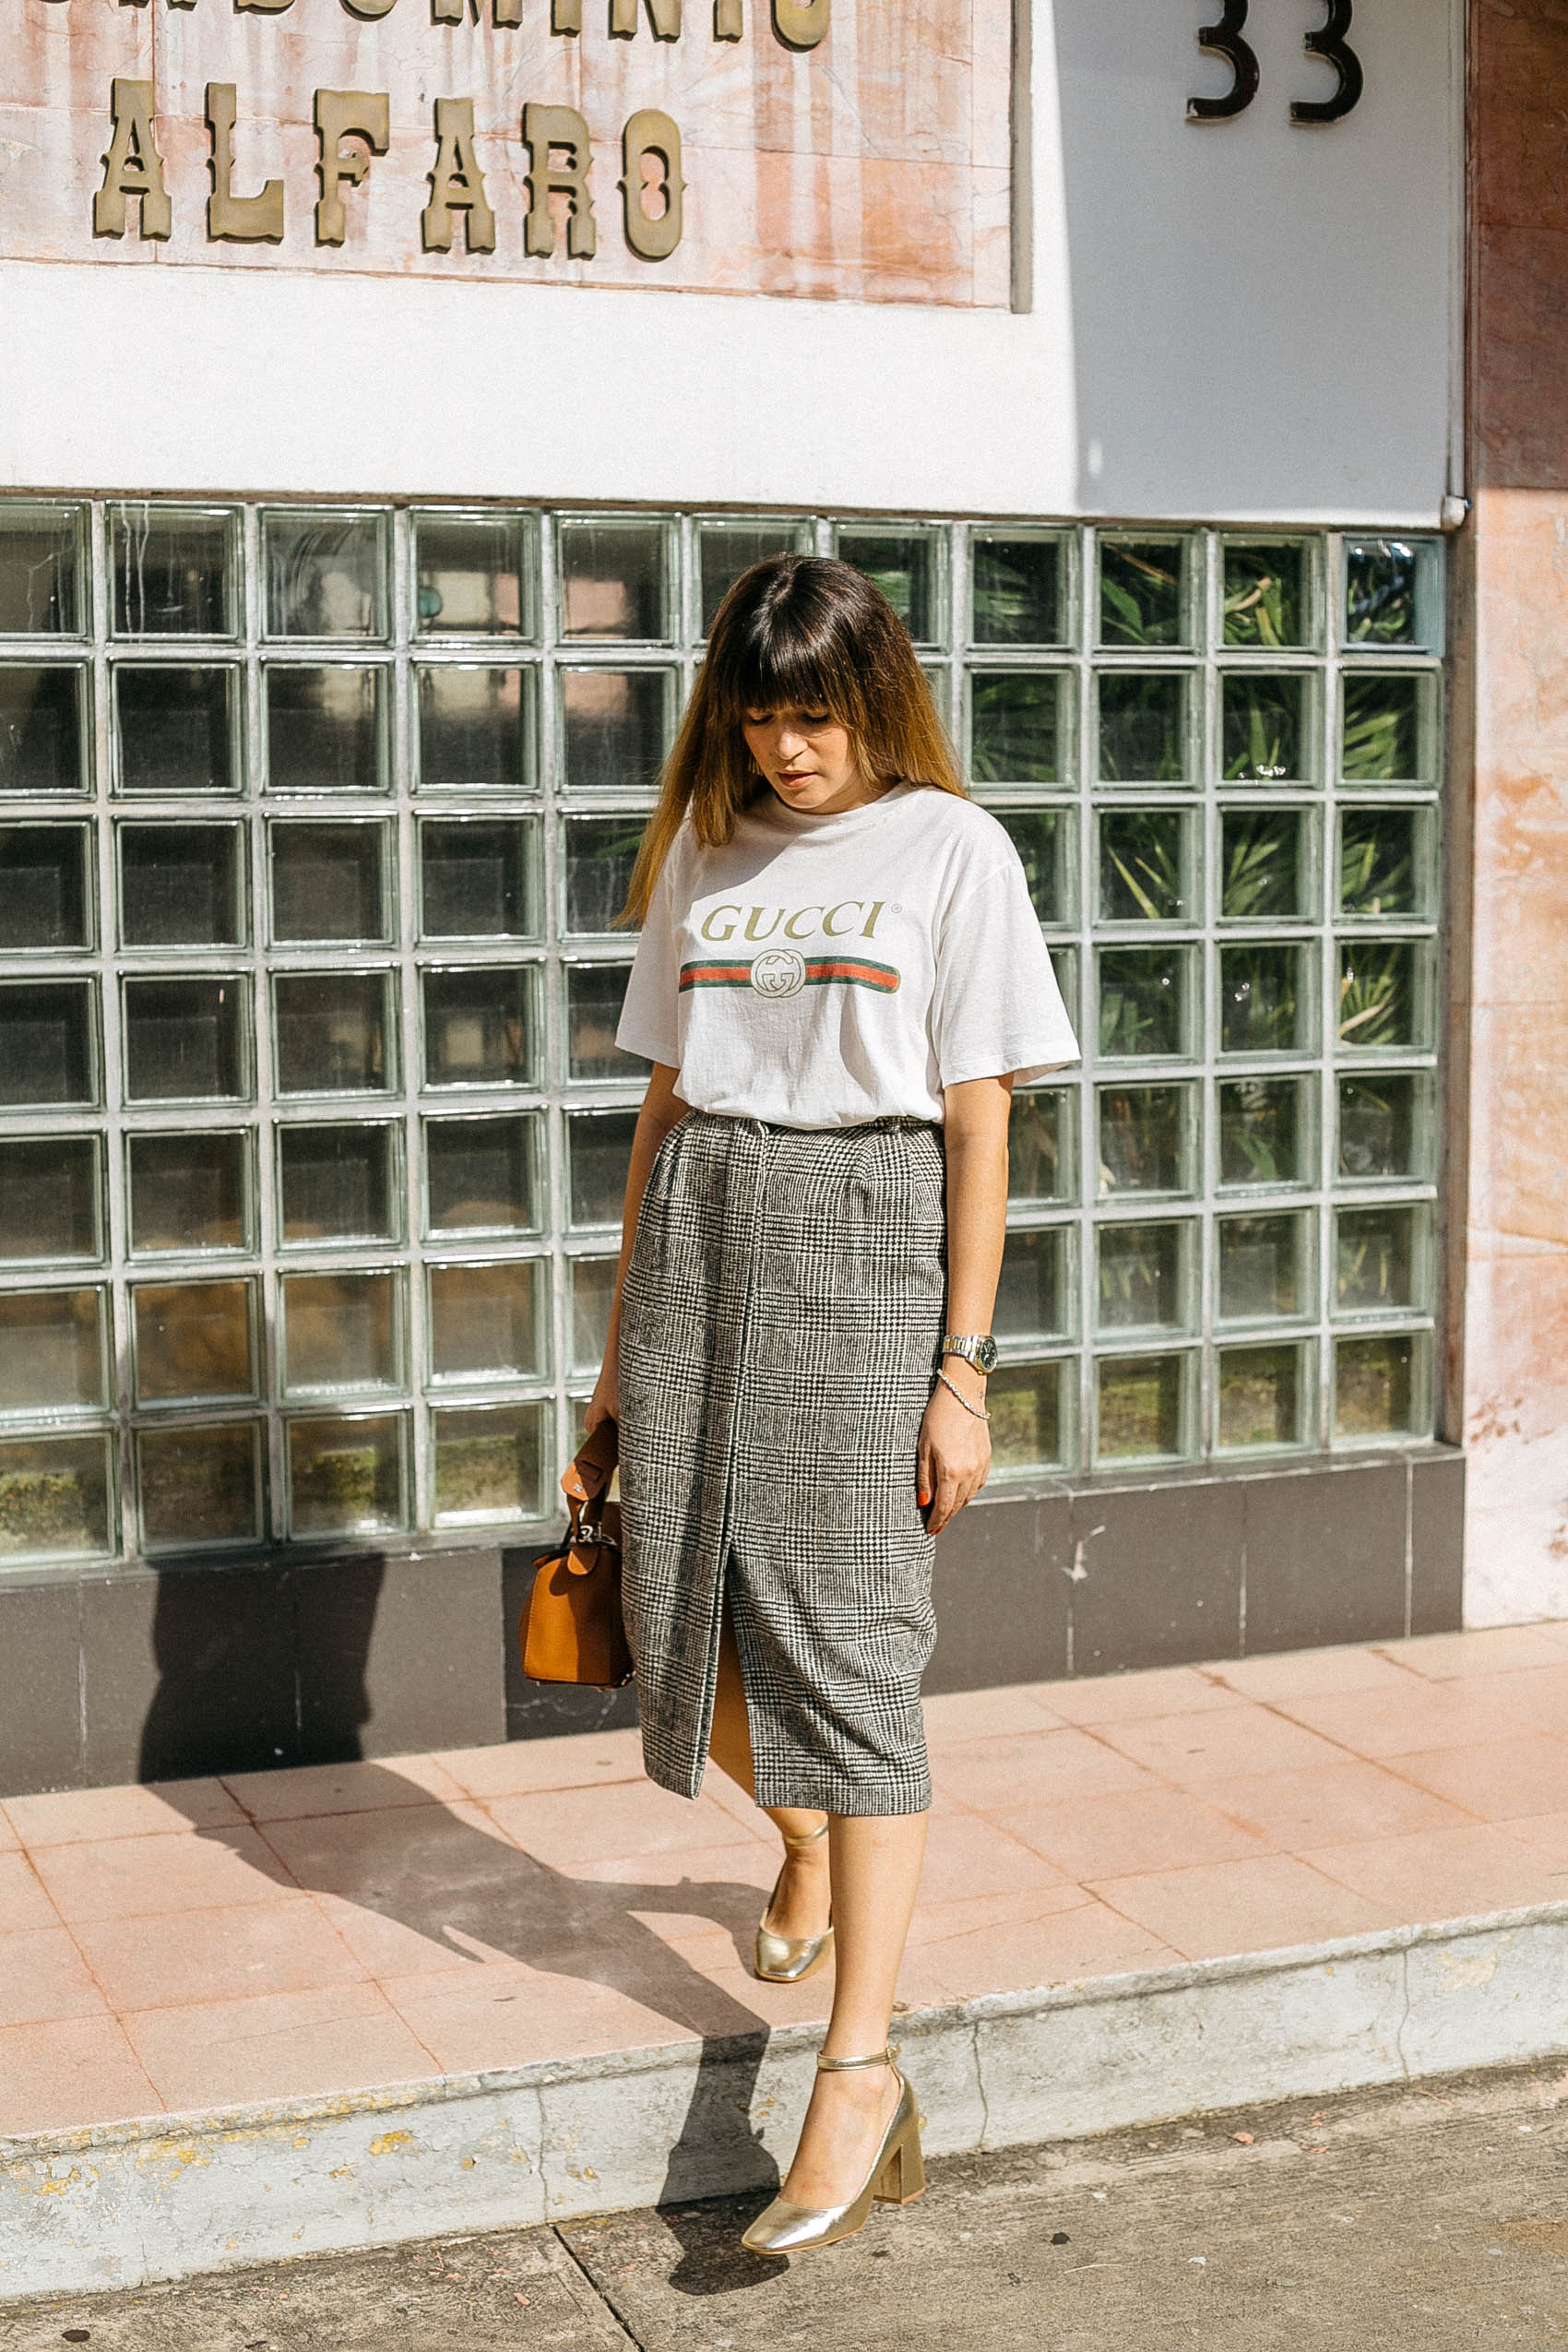 How to update a tweed pencil skirt